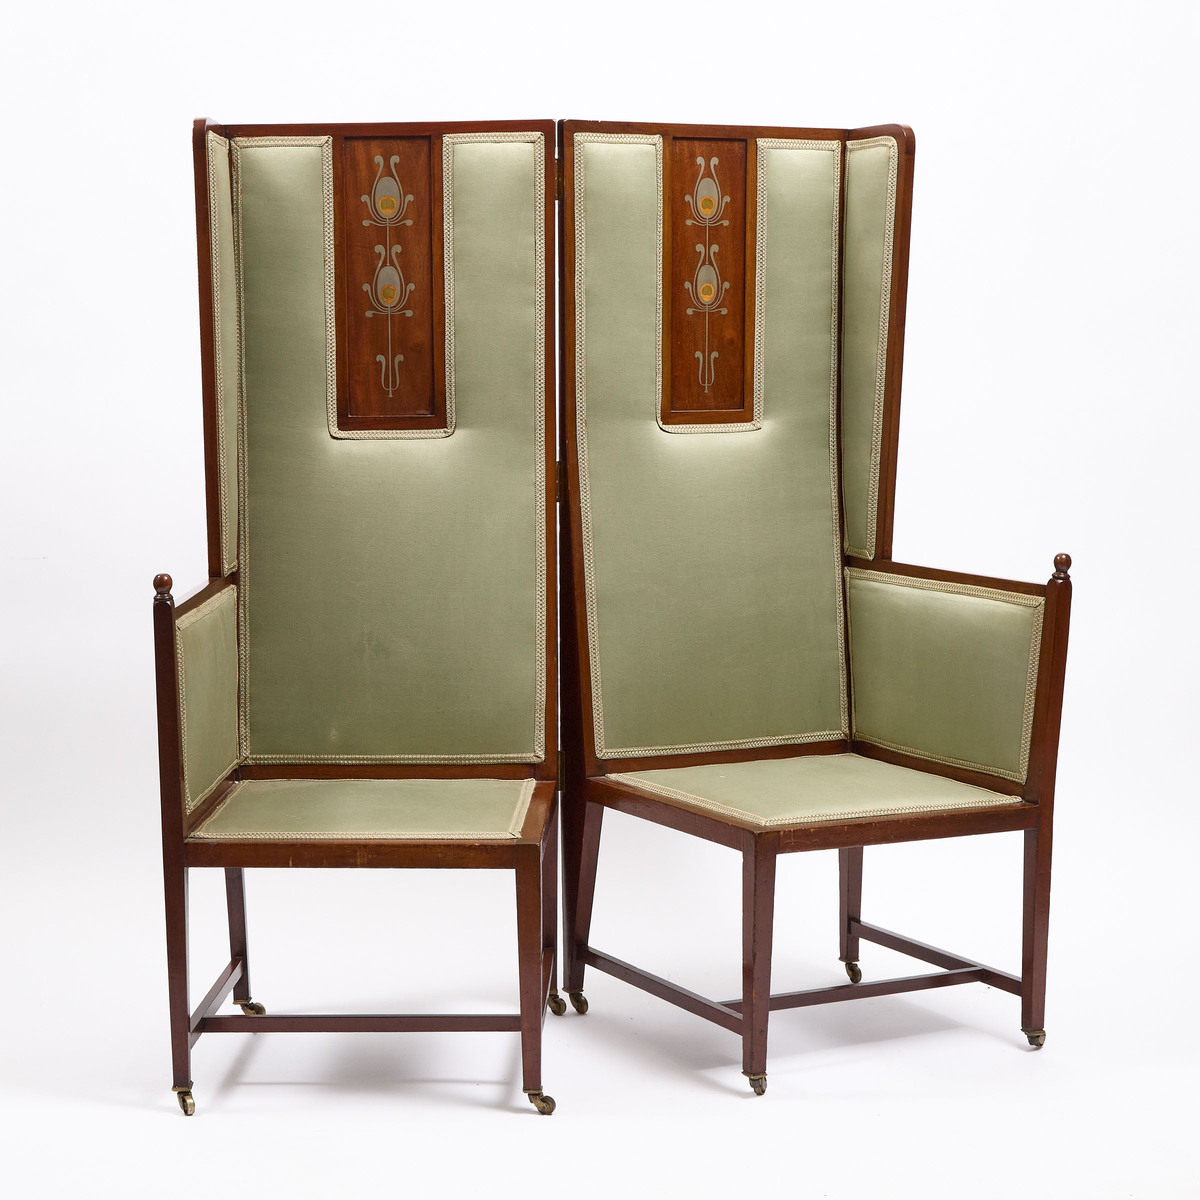 George Logan for Wylie and Lochhead Pewter and Brass Inlaid Mahogany Folding Settle, c.1900, 55.5 x - Image 2 of 3